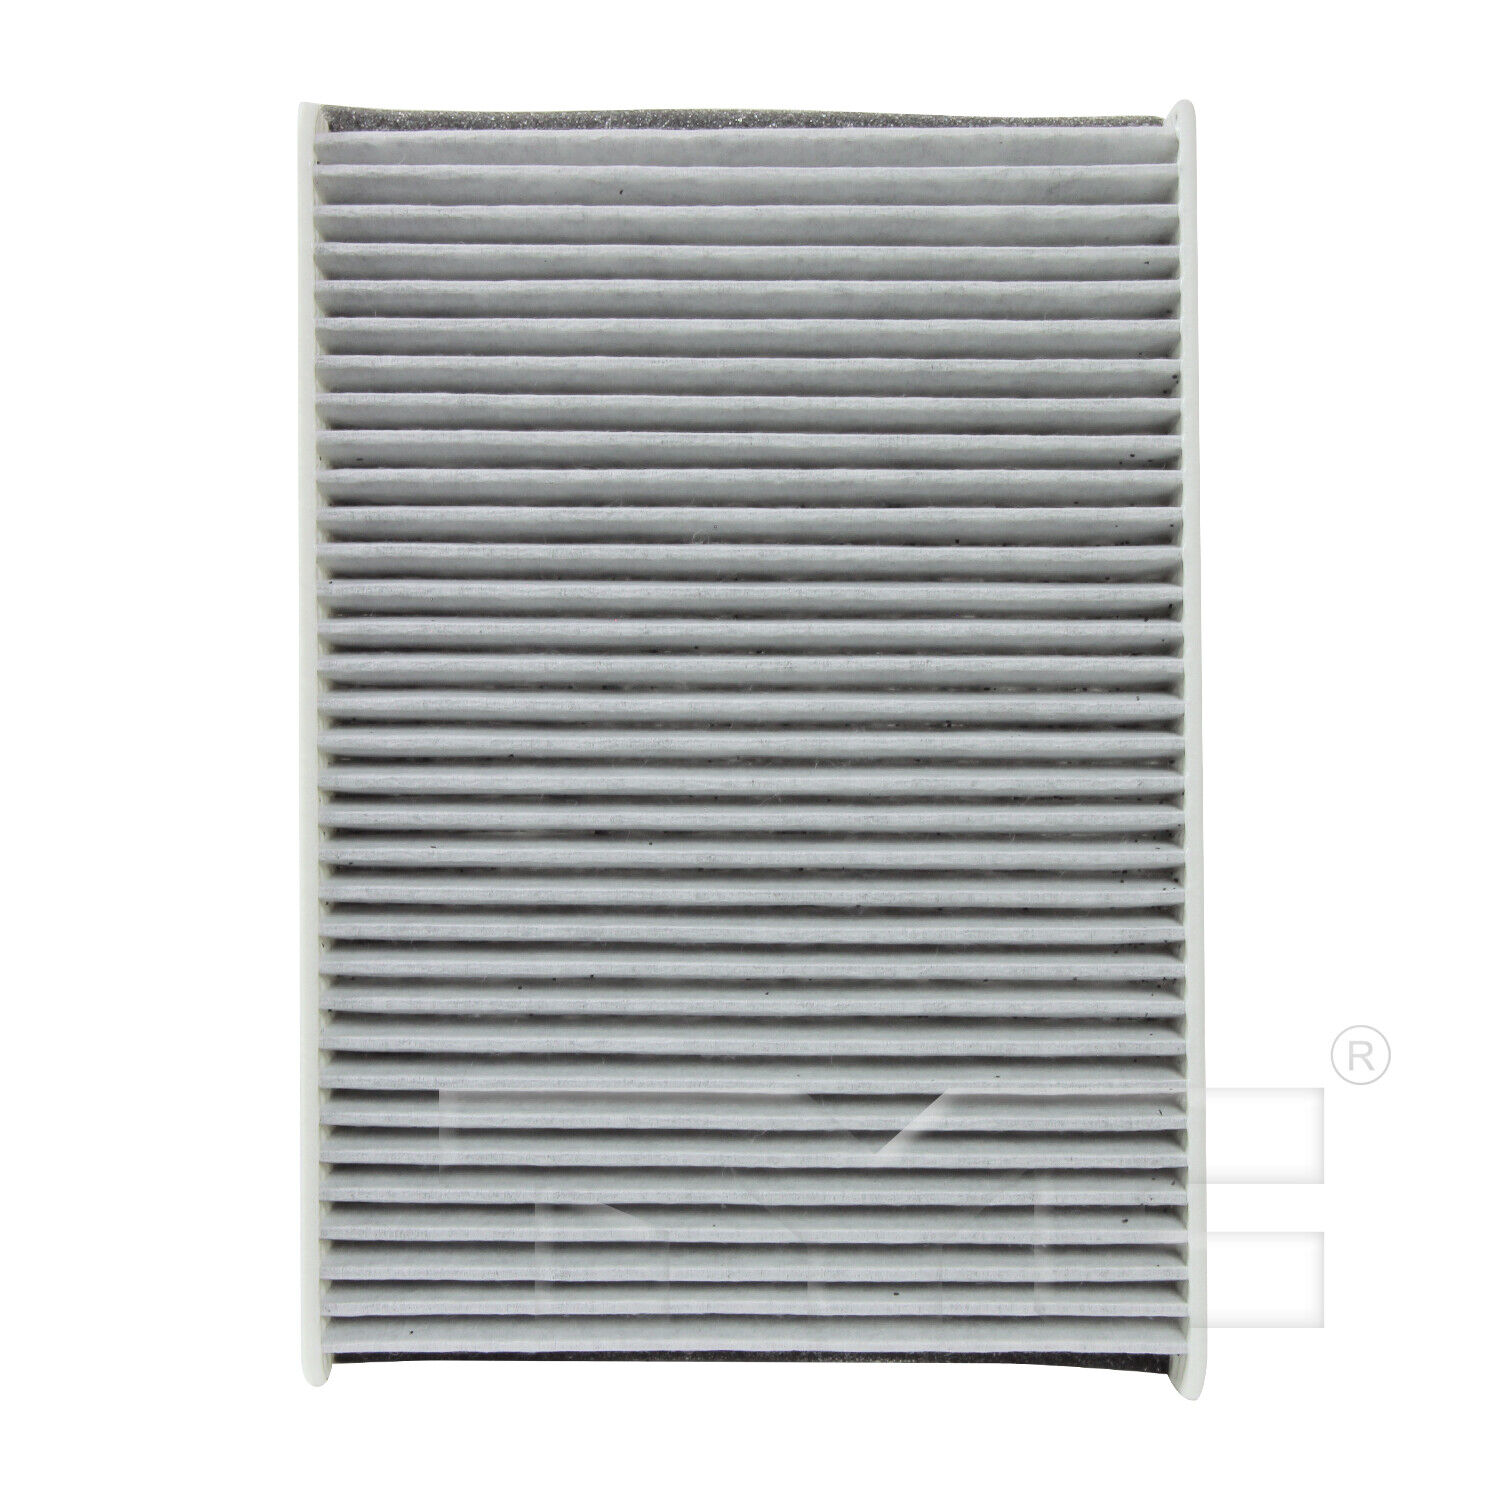 A/C Cabin Air Filter Carbon for 07-16 Volvo S-80 30733893-9